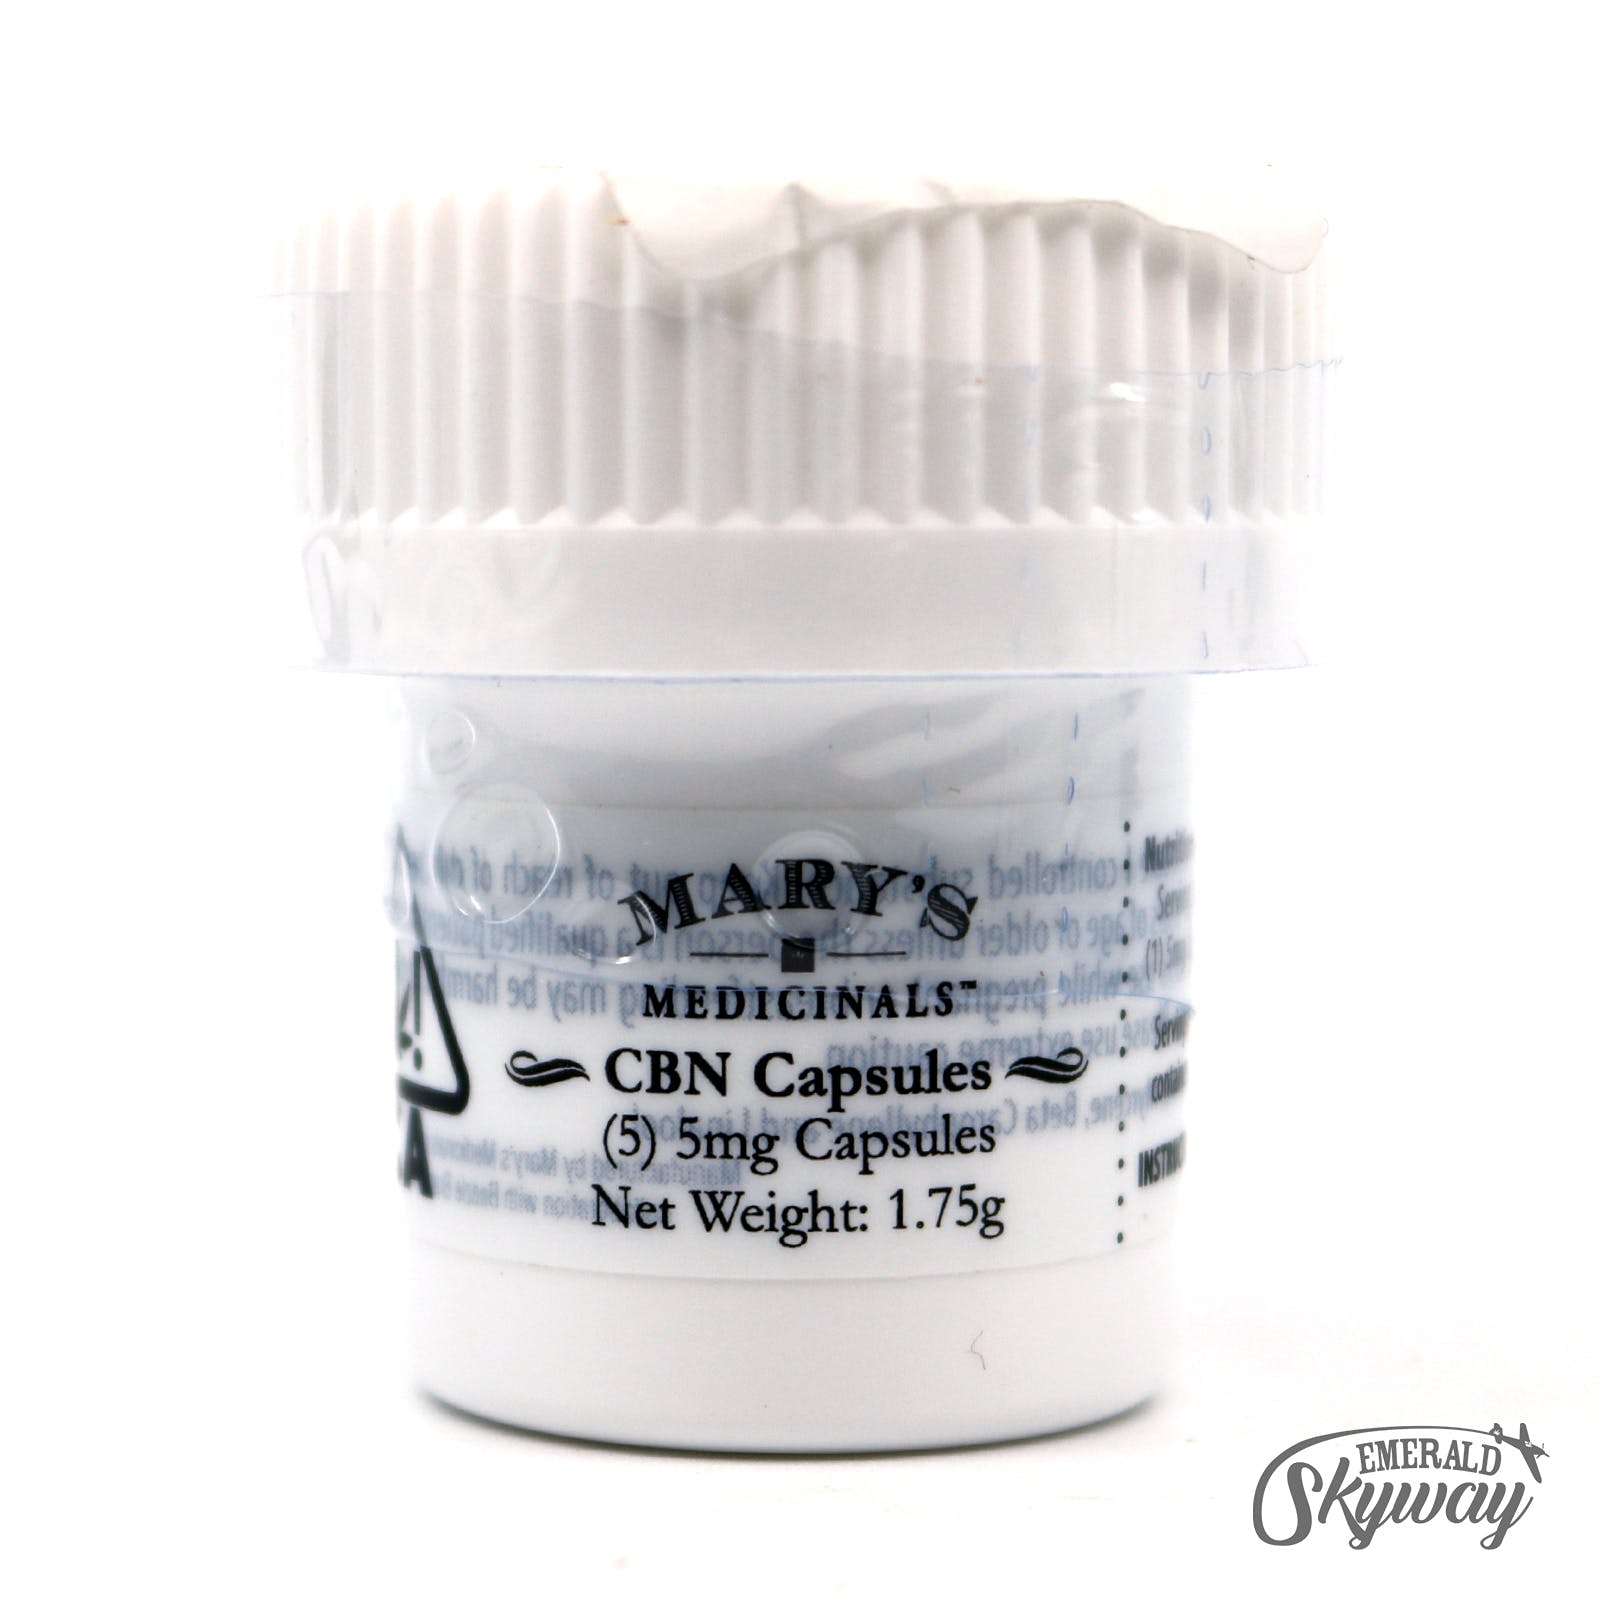 Mary's Medicinals: CBN Capsules - 5 pack